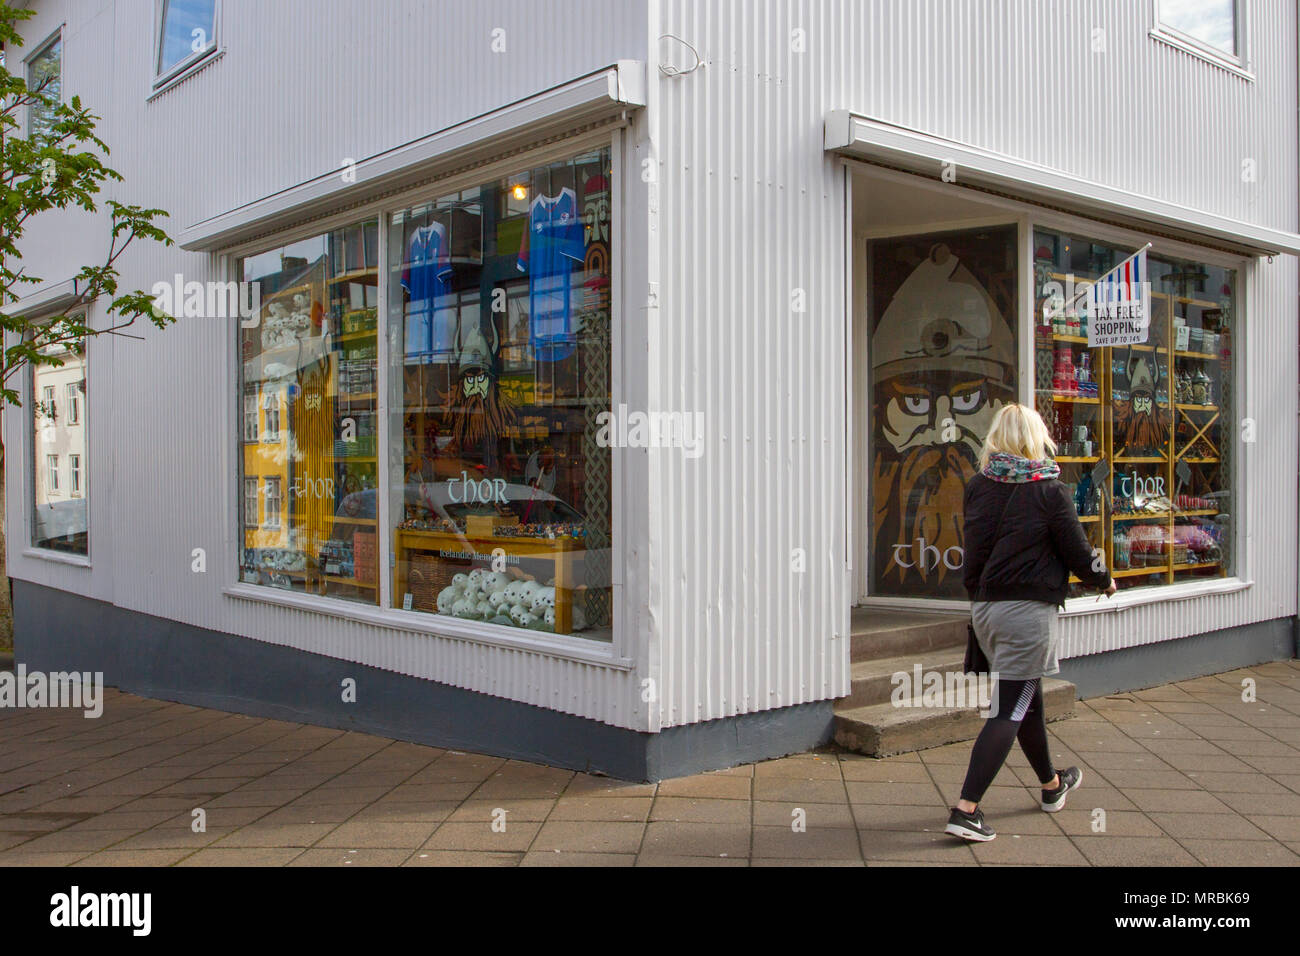 Shops, Shoppers and shopping in Reykjavik, Iceland, Stock Photo